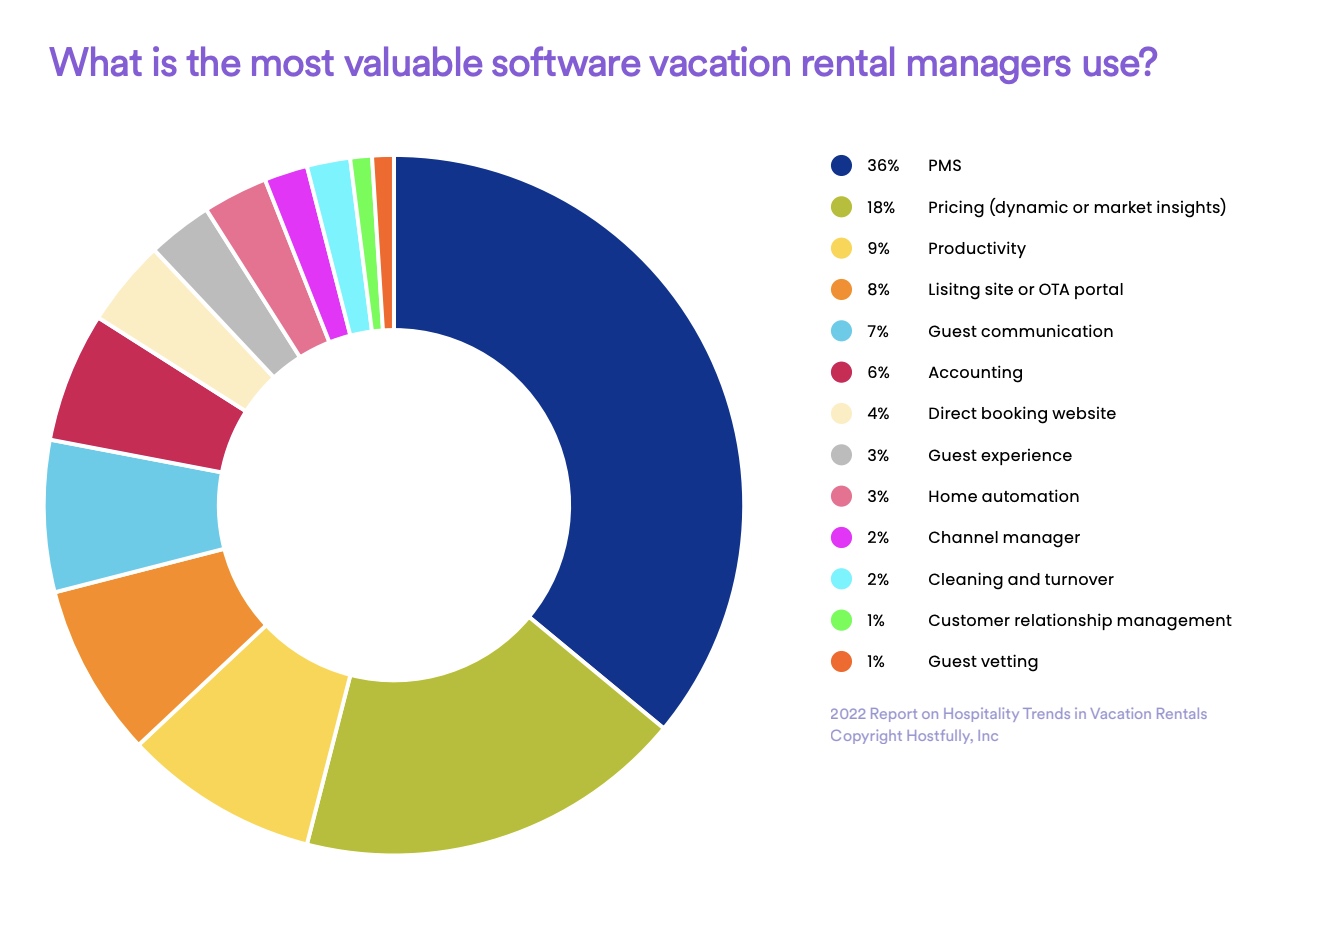 Pie chart showing the most valuable type of software used by vacation rental managers in 2022